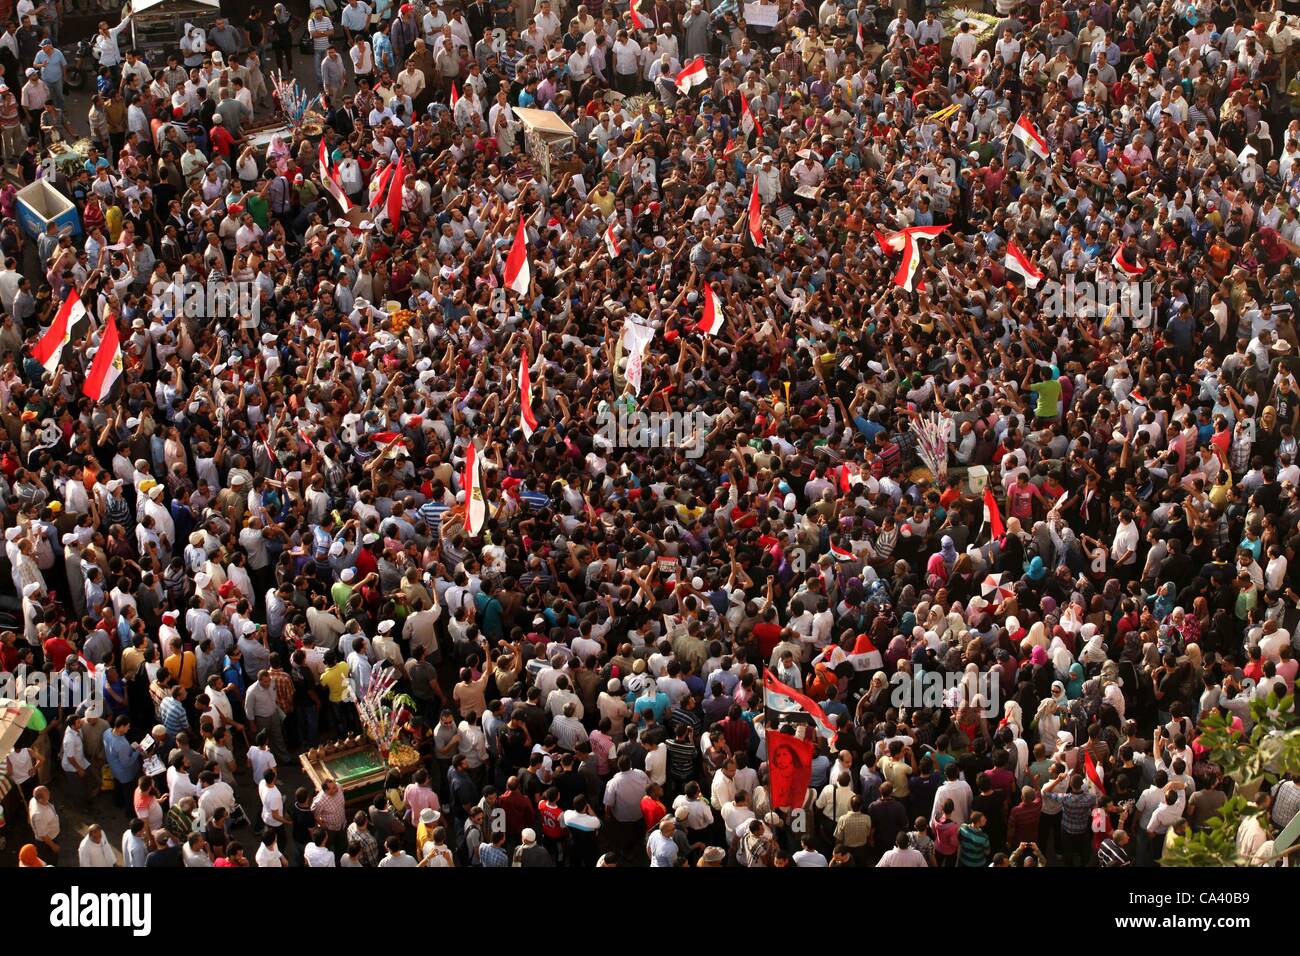 June 3, 2012 - Cairo, Egypt - Egyptian protesters demonstrate a day after a court sentenced deposed president Hosni Mubarak to life in prison, at Tahrir Square. Egyptian pro-democracy campaigners called for a new uprising on Sunday, enraged that a court had spared Mubarak his life over the killing o Stock Photo